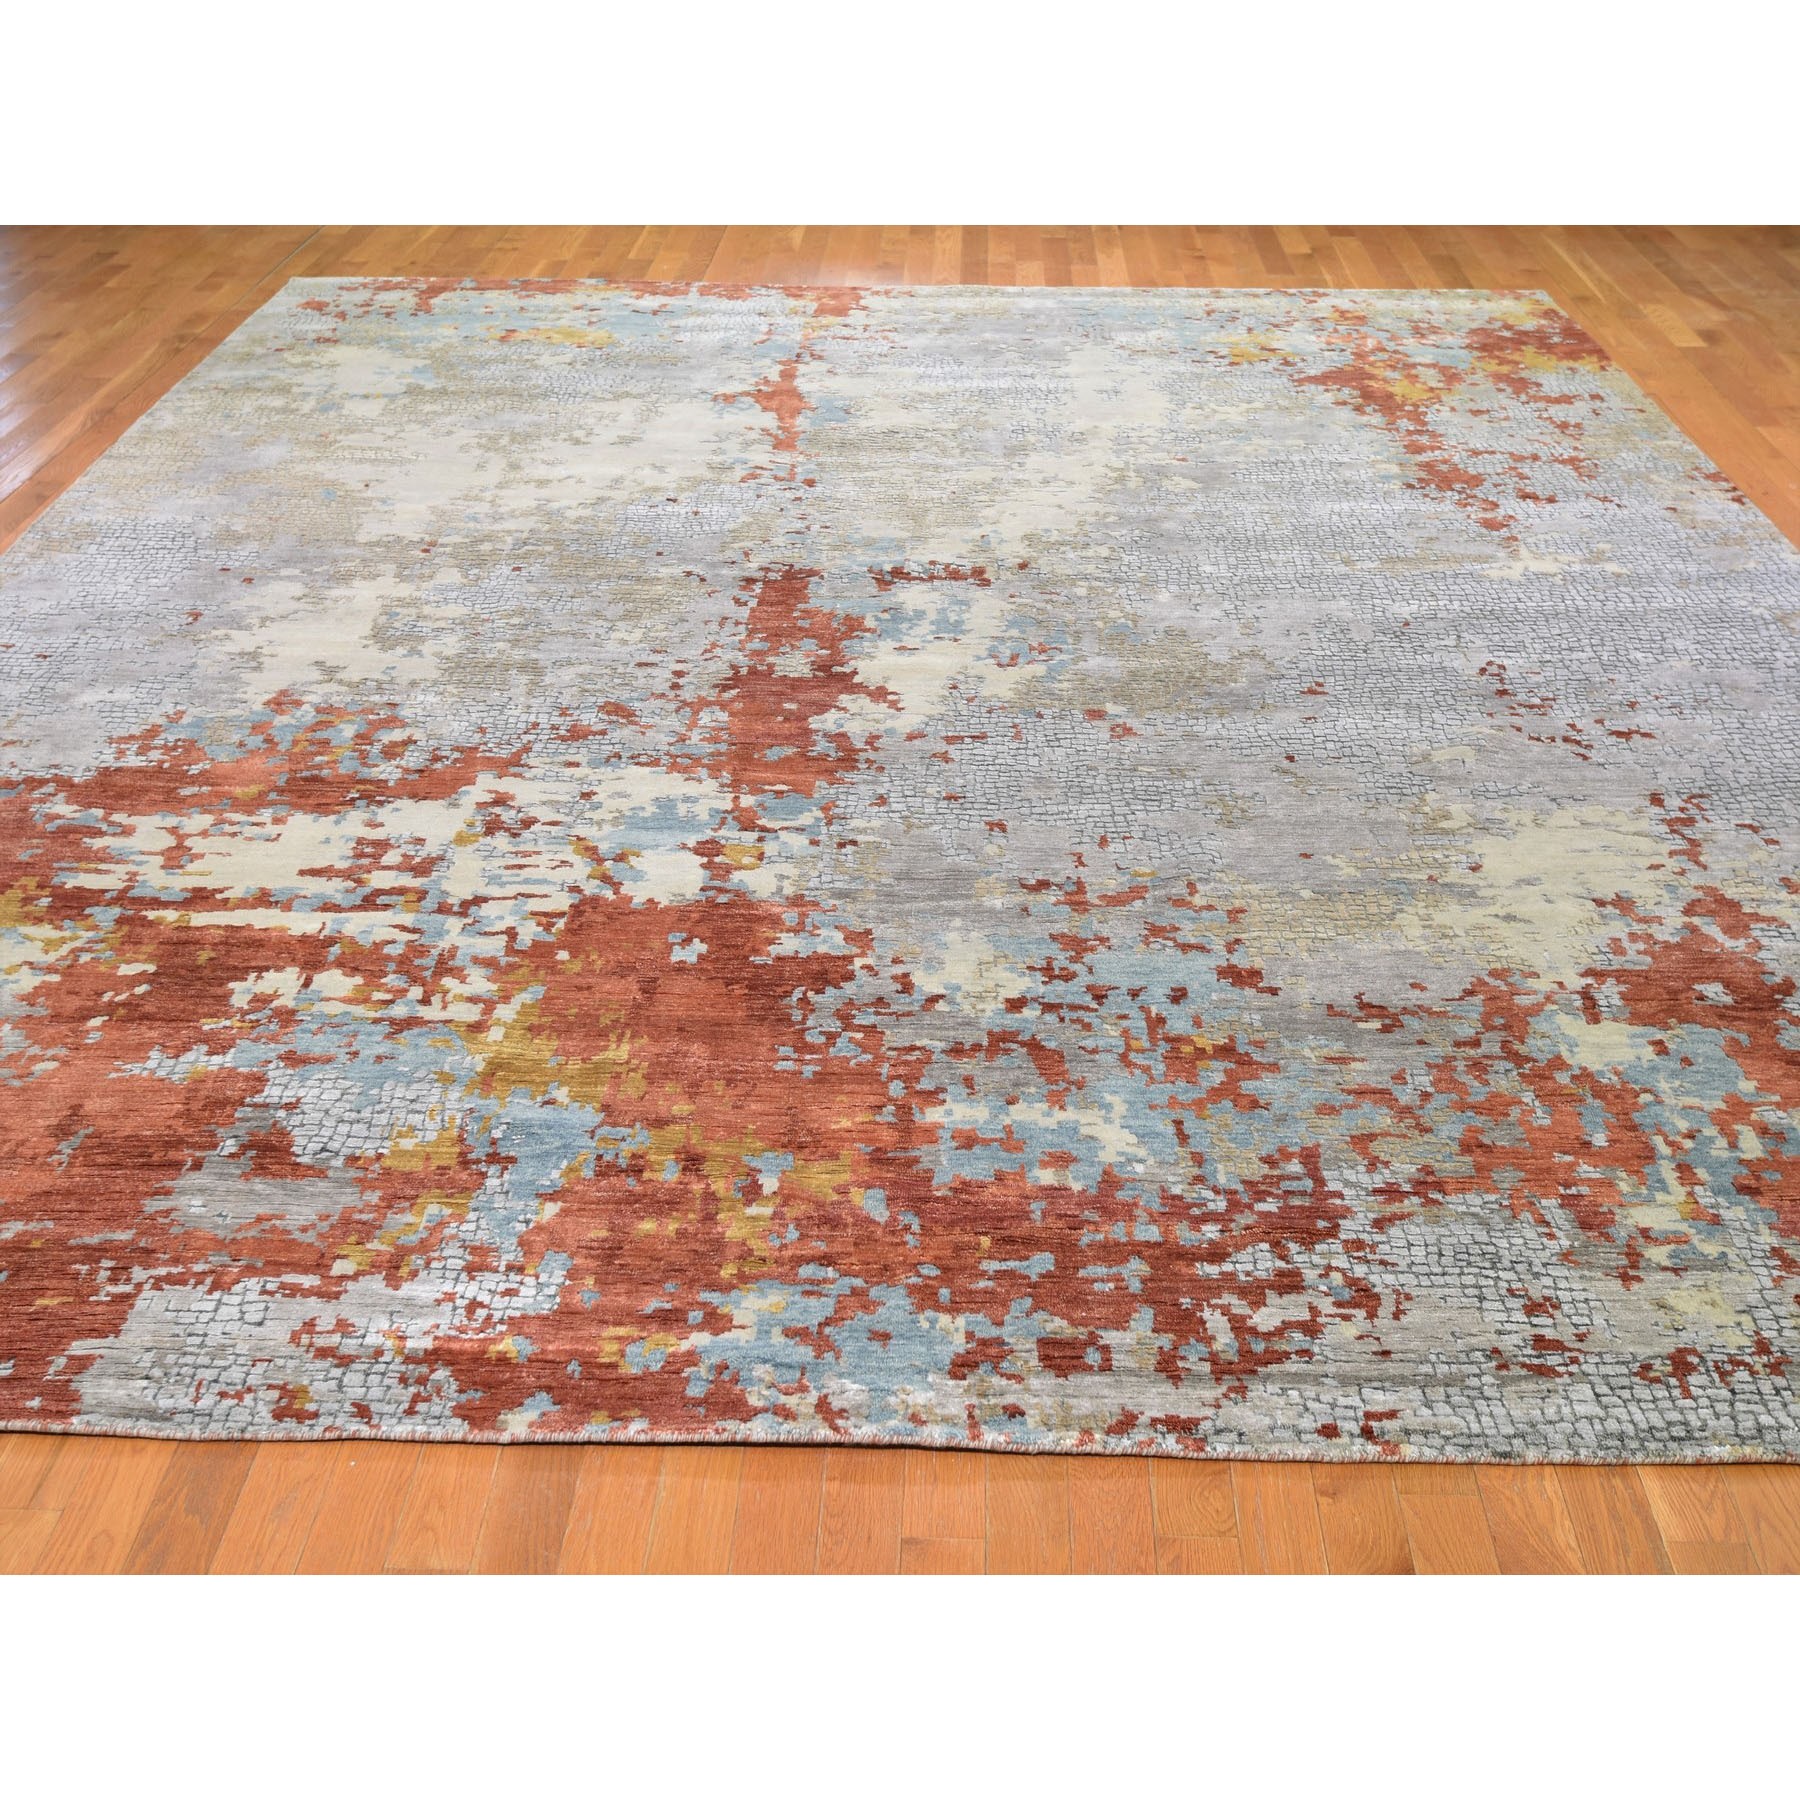 11-10 x14-9  Oversized Wool And Silk Abstract With Fire Mosaic Design Hand Knotted Oriental Rug 